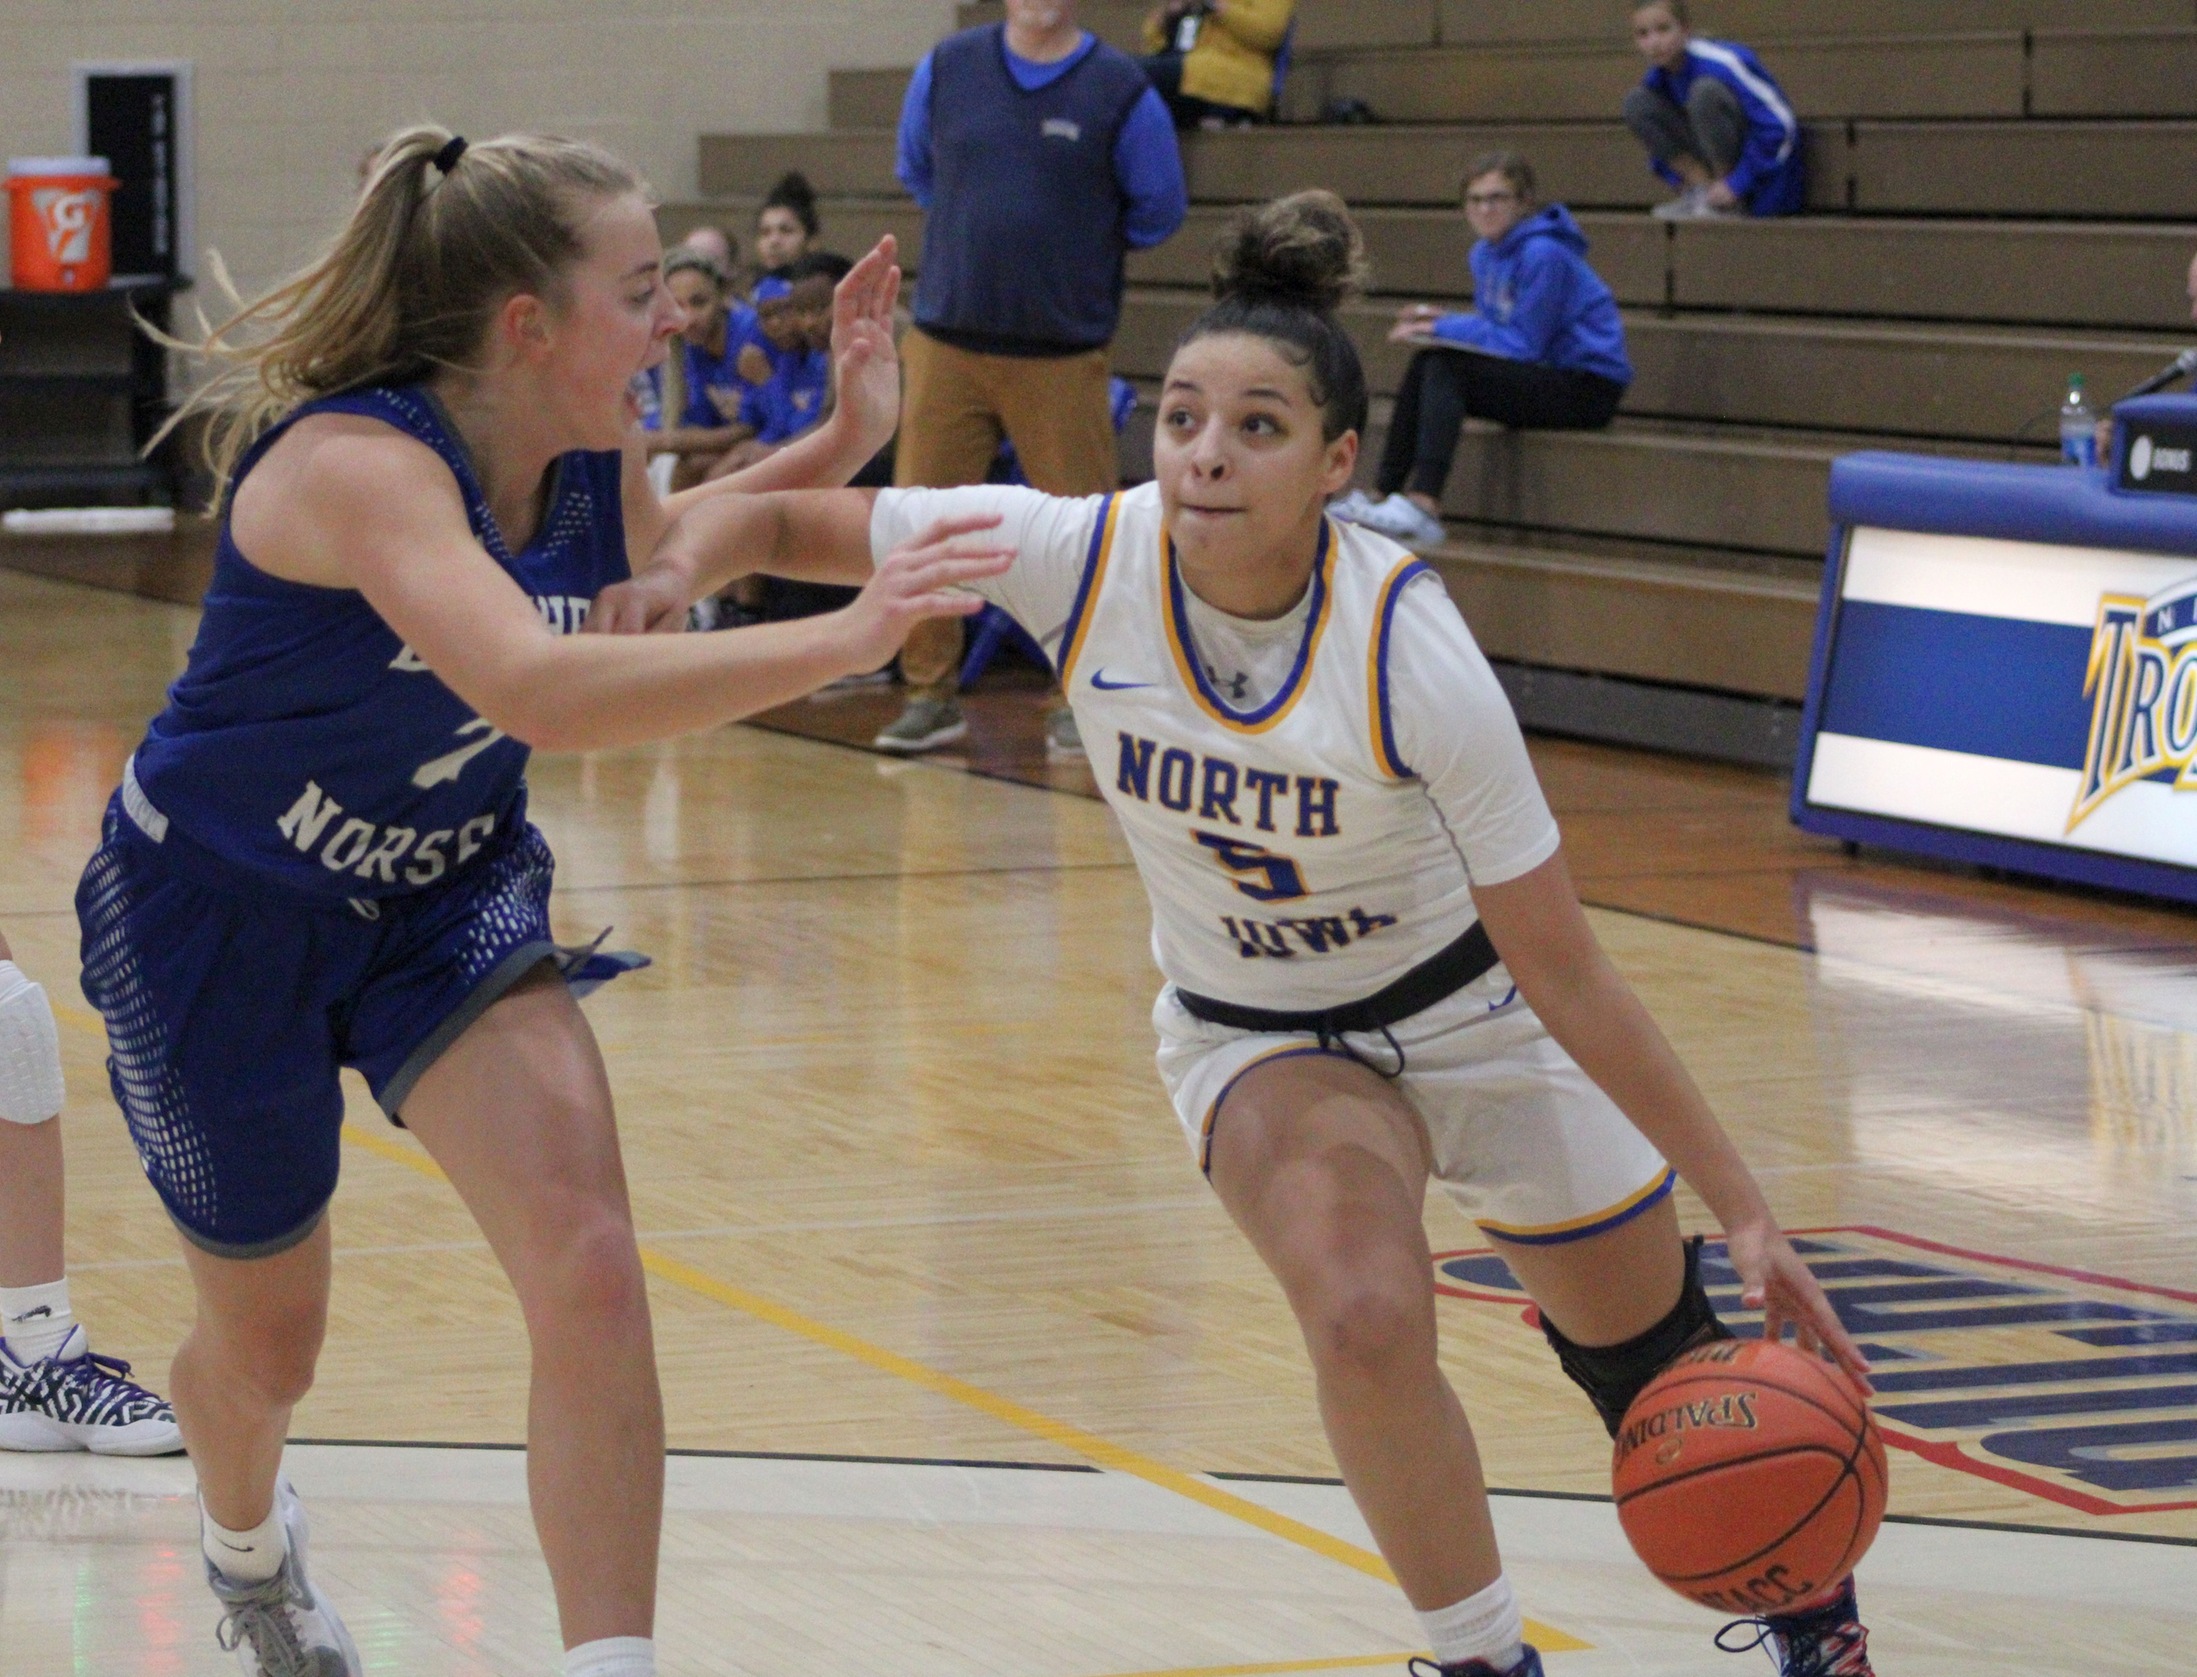 NIACC's Amaya Doree drives to the basket during Wednesday's game against the Luther College Junior Varsity.